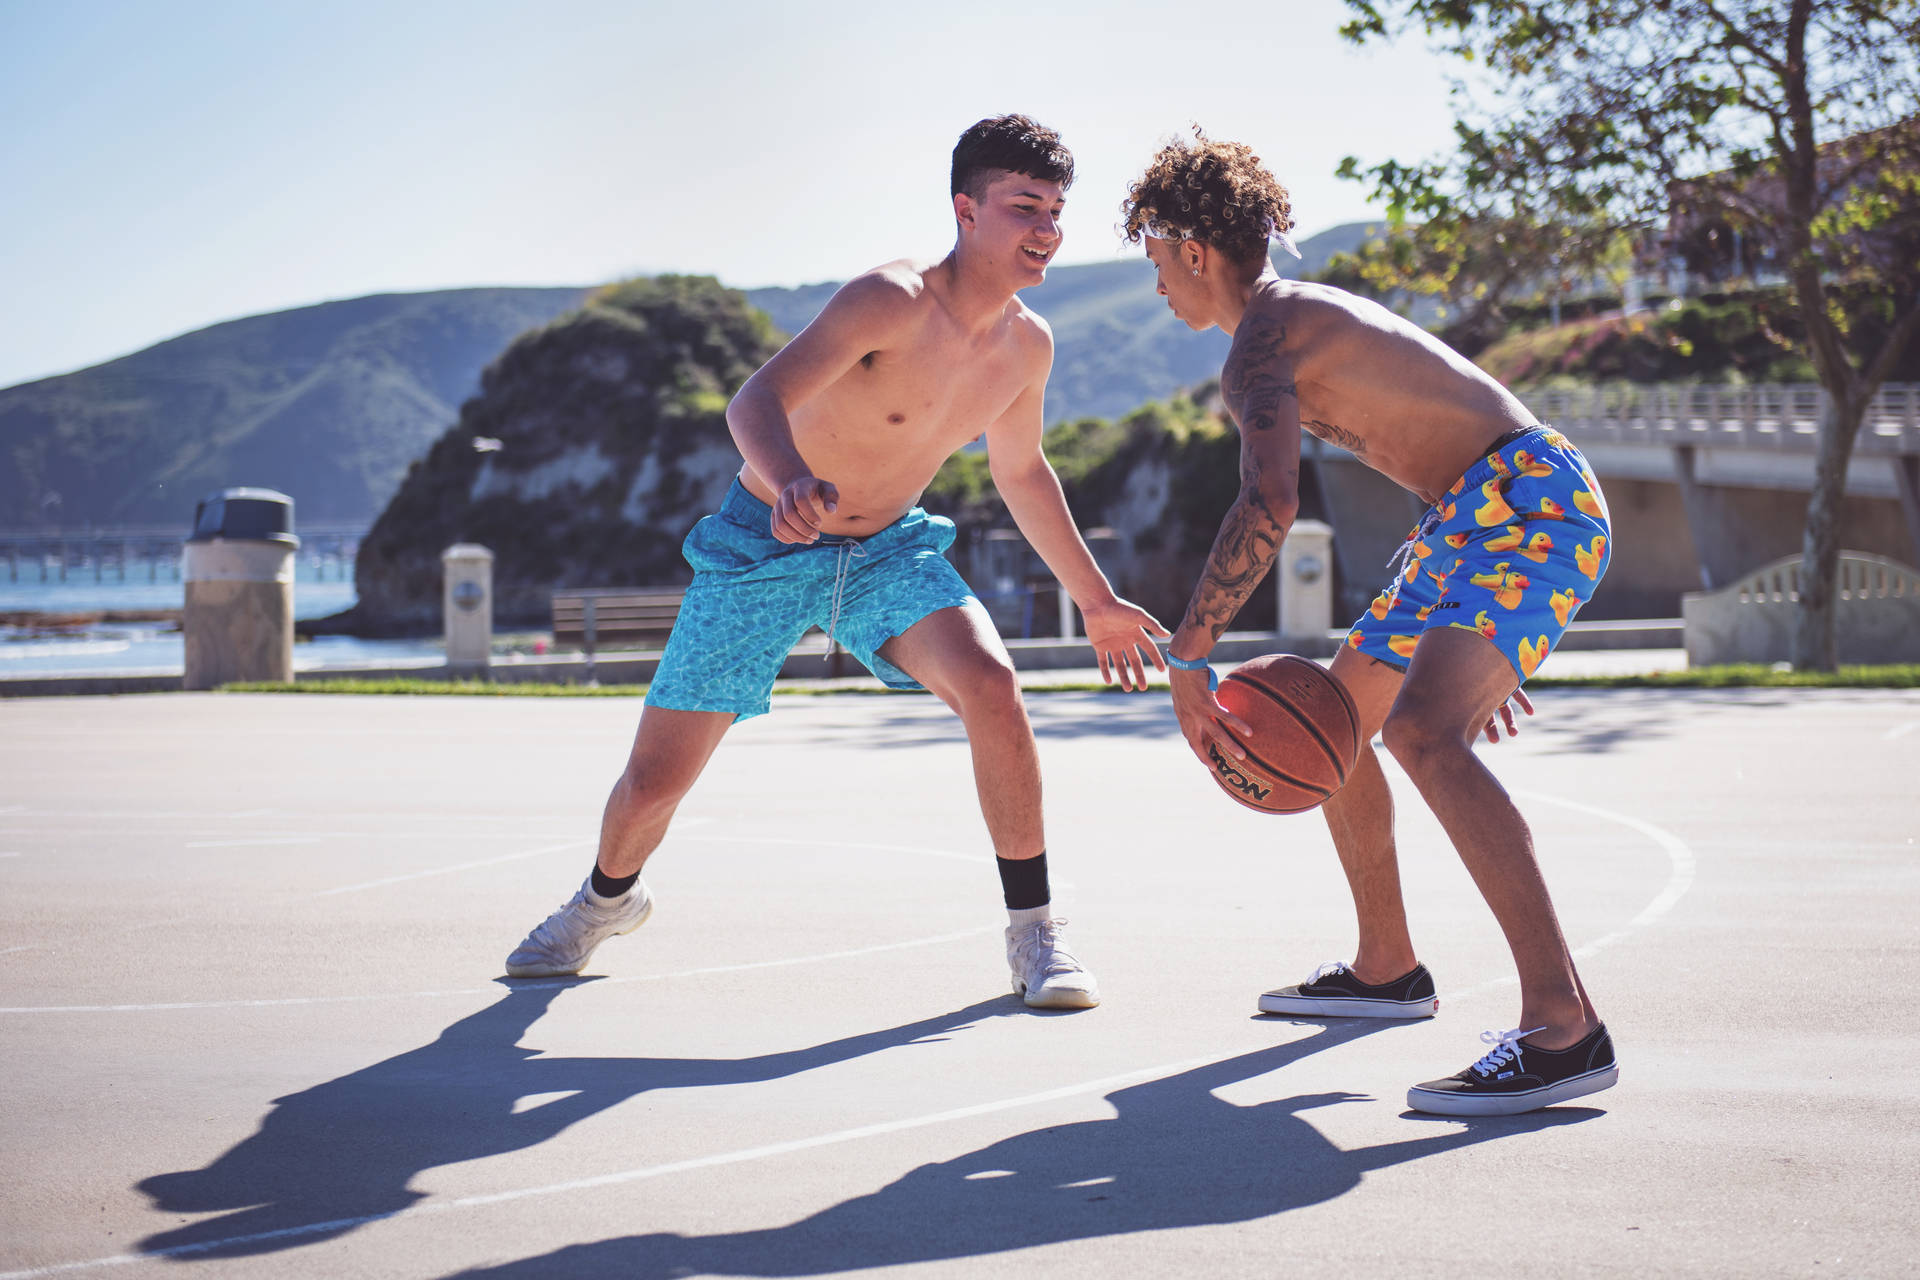 Best Friends Playing Basketball Background